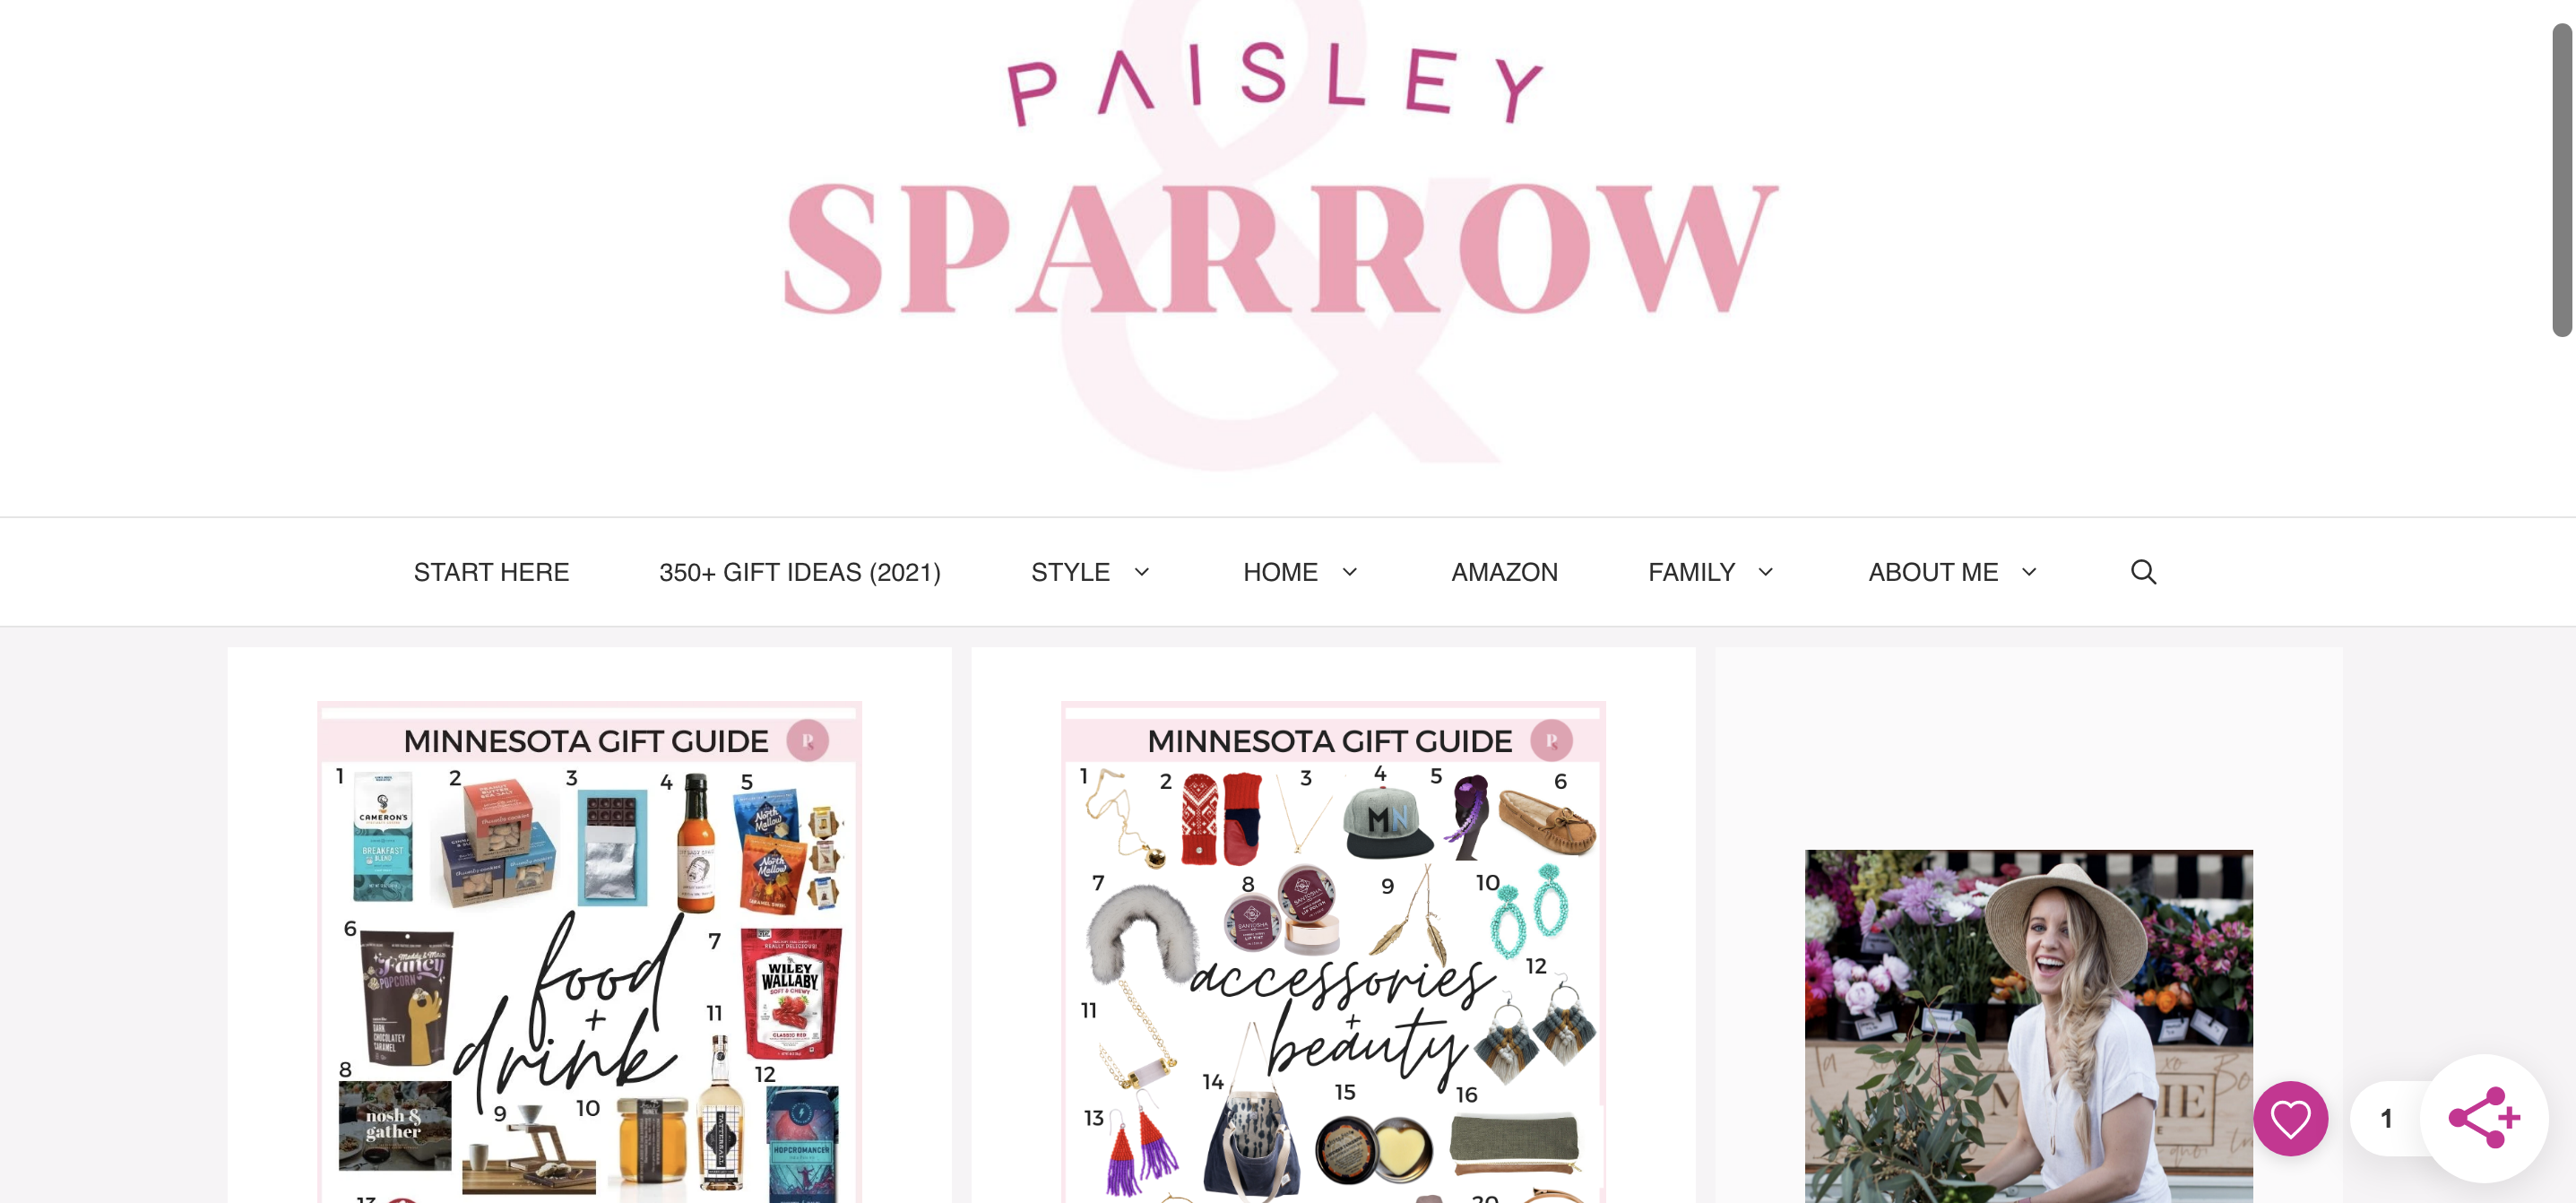 paisley and sparrow featured the locket sisters in their 2021 holiday gift guide